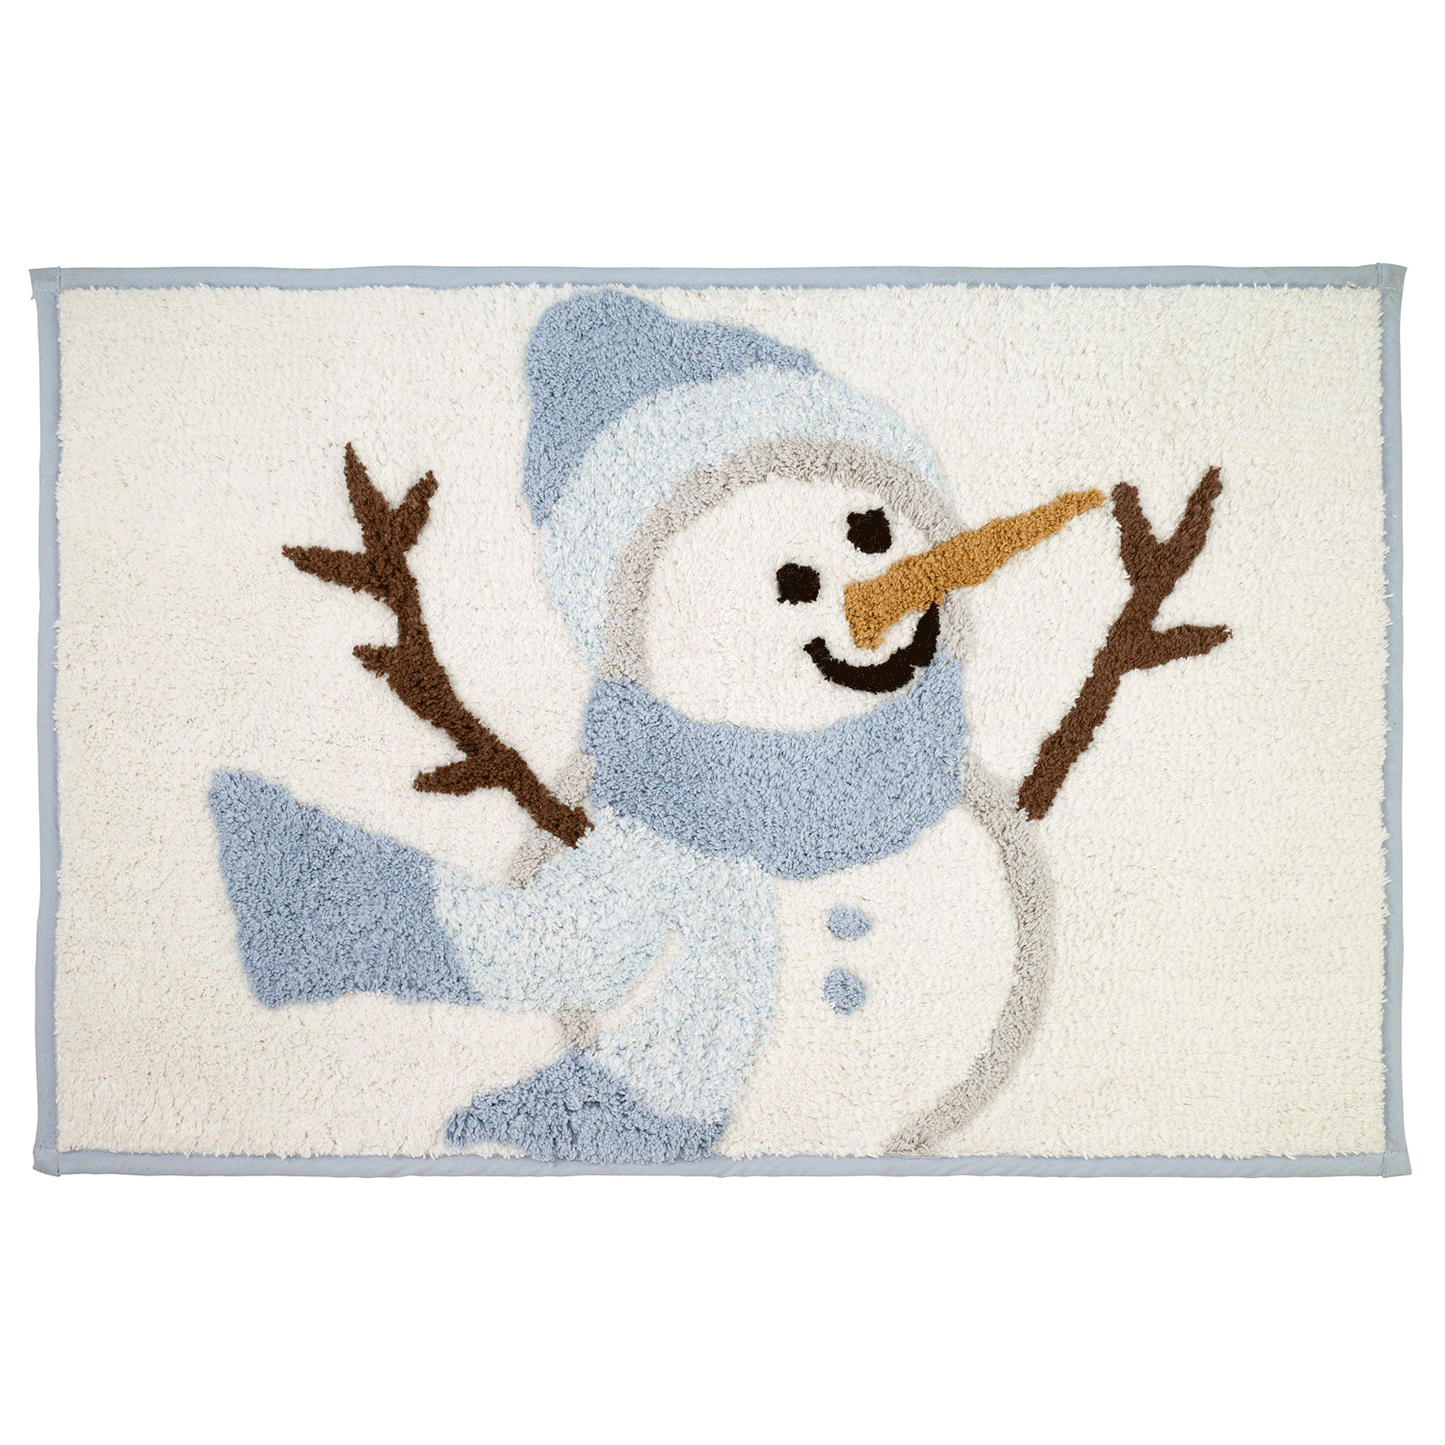 Frosty Friends Fabric Shower Curtain